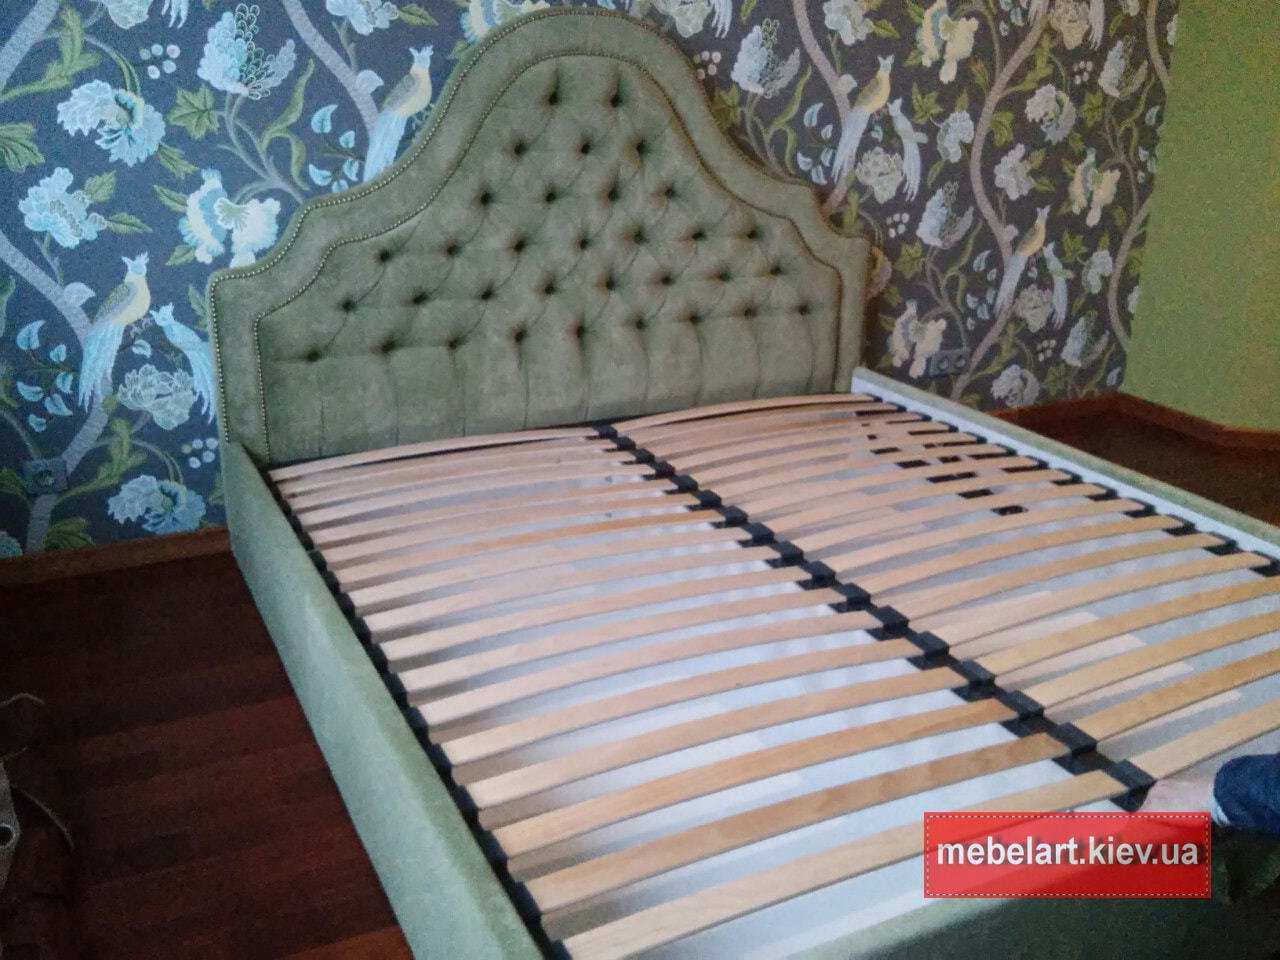 making beds with a soft headboard